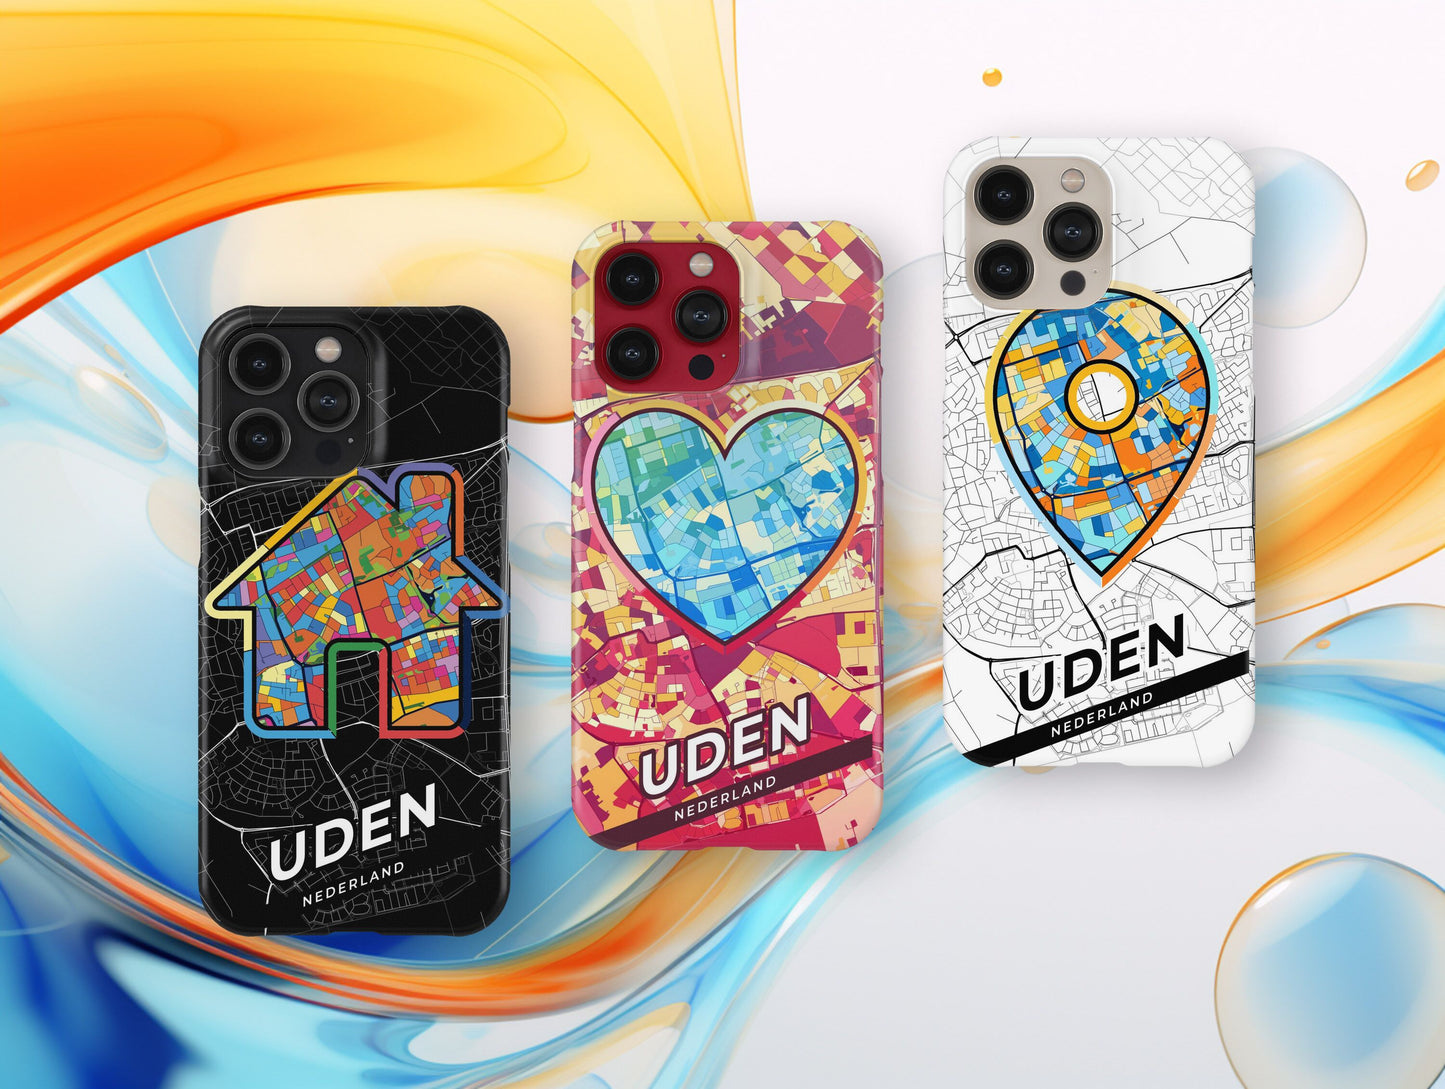 Uden Netherlands slim phone case with colorful icon